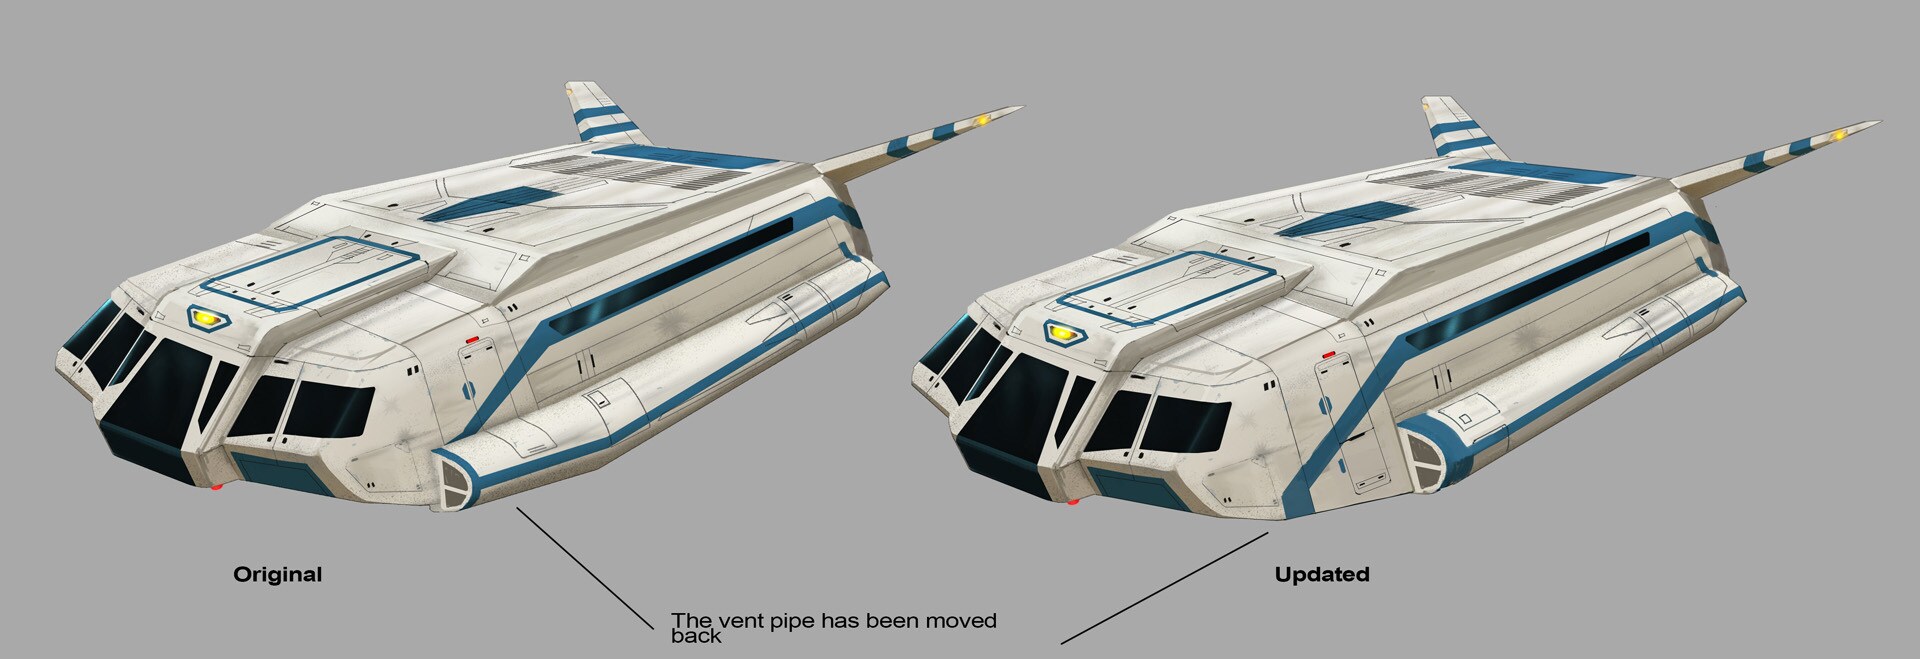 Star commuter shuttle illustration, showing original and updated versions.